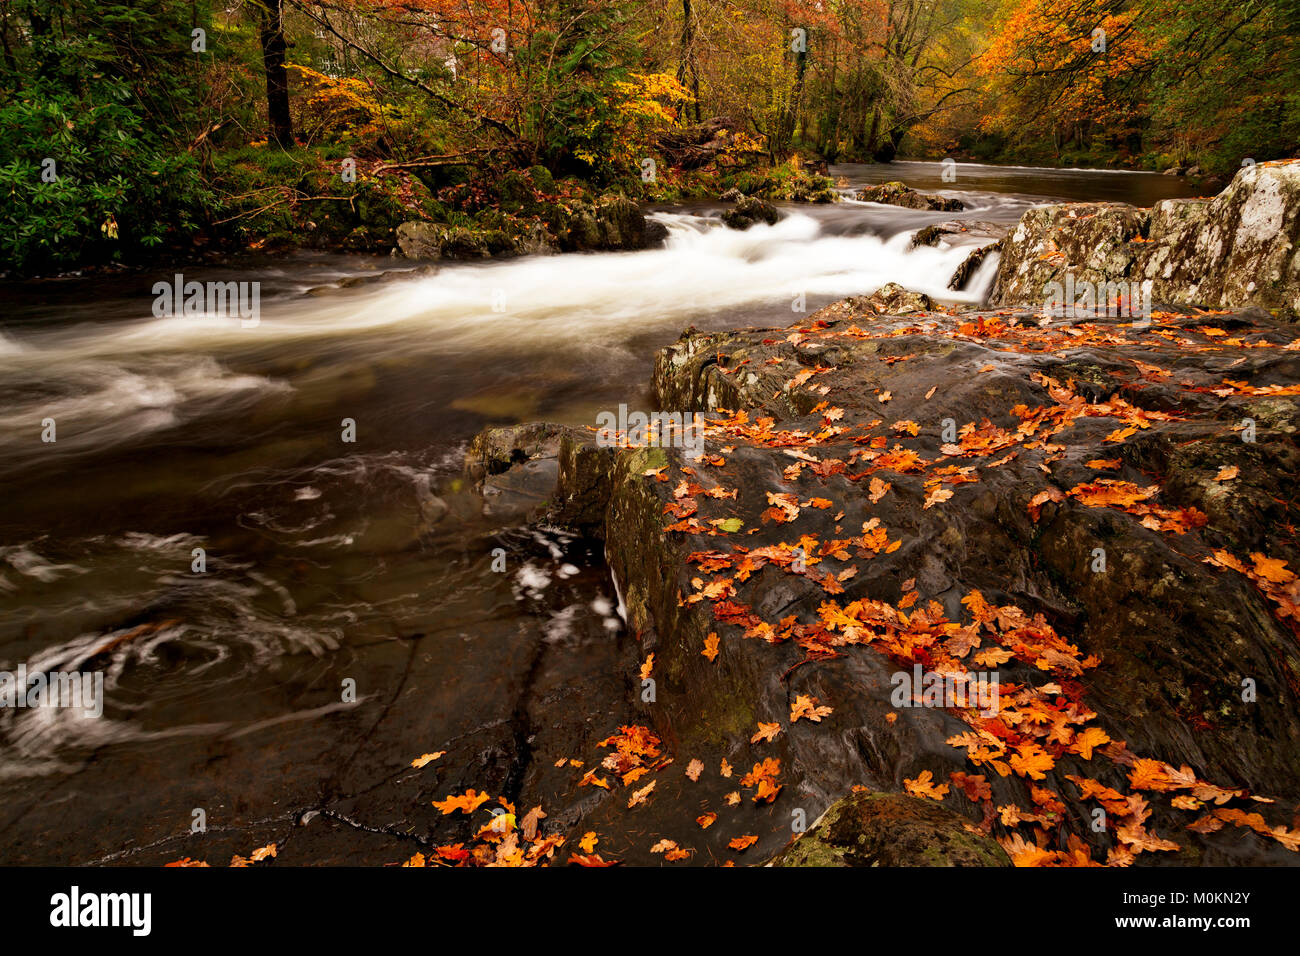 River flowing past trees and rocks with autumn leaves Stock Photo